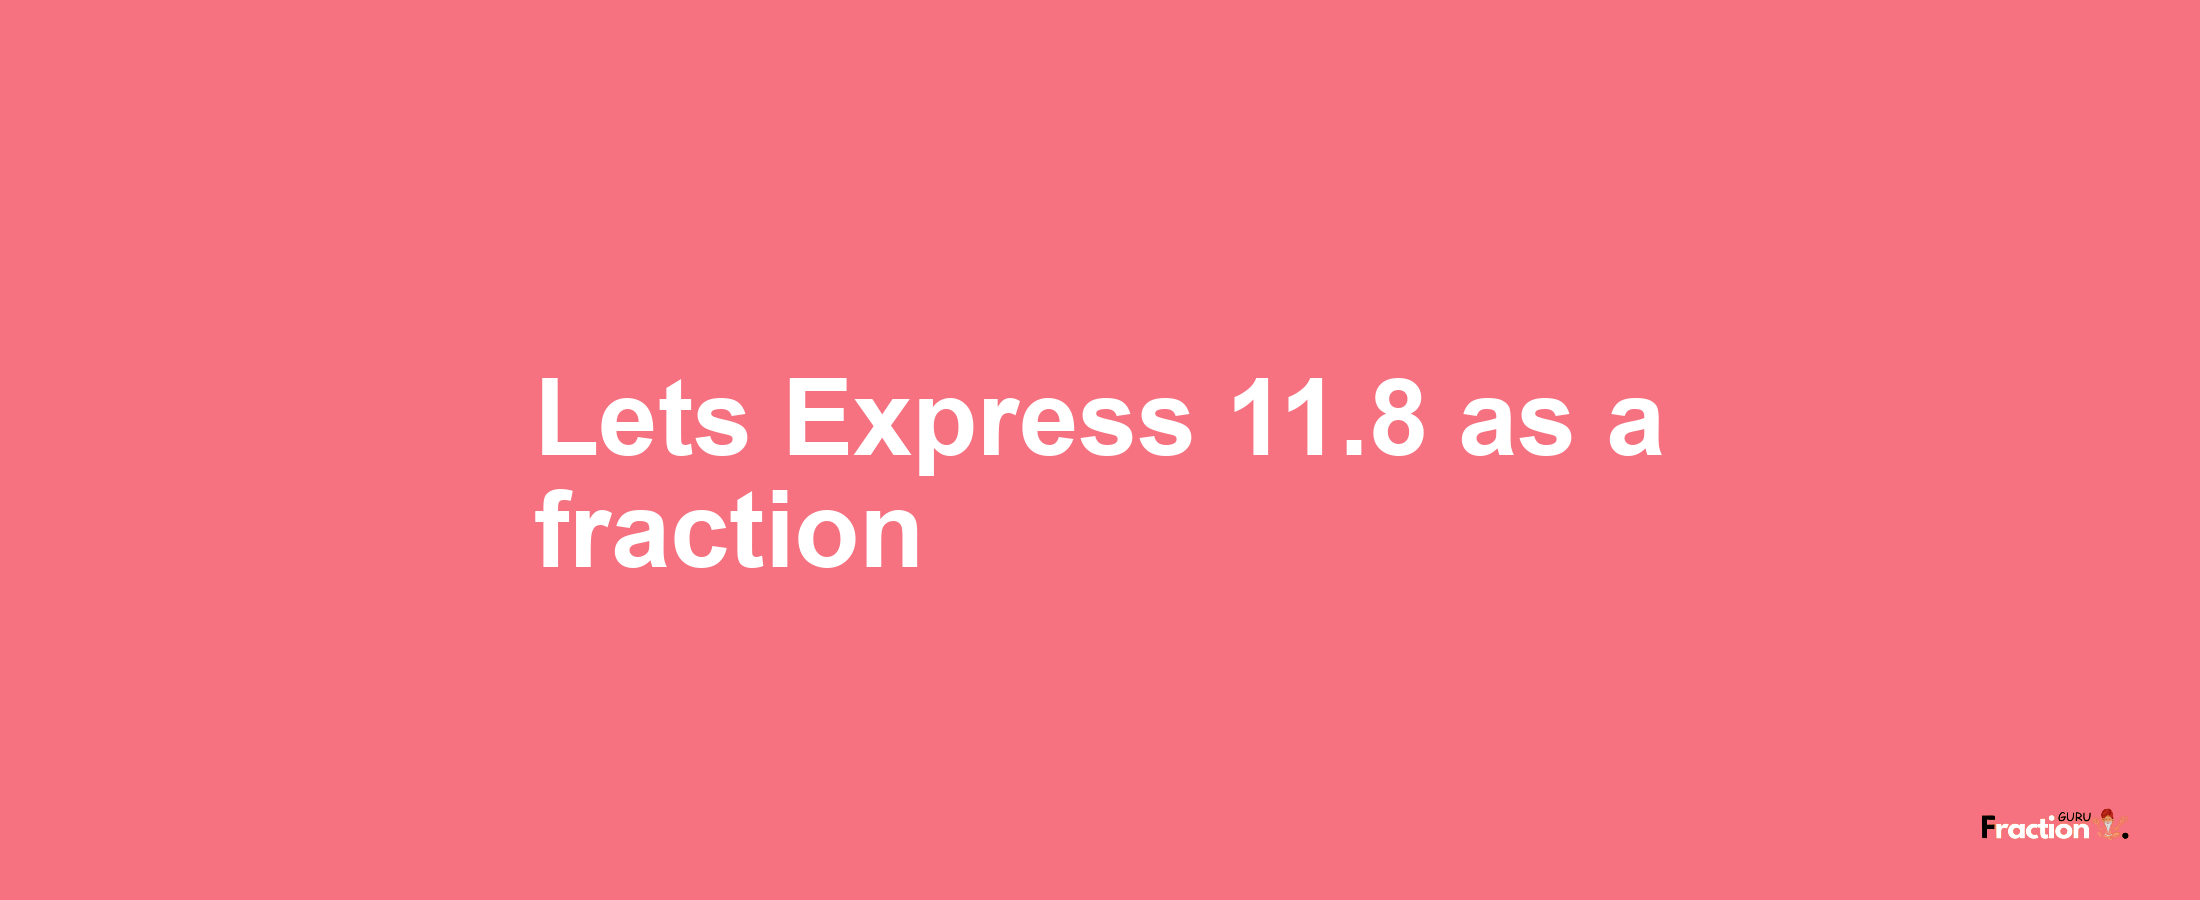 Lets Express 11.8 as afraction